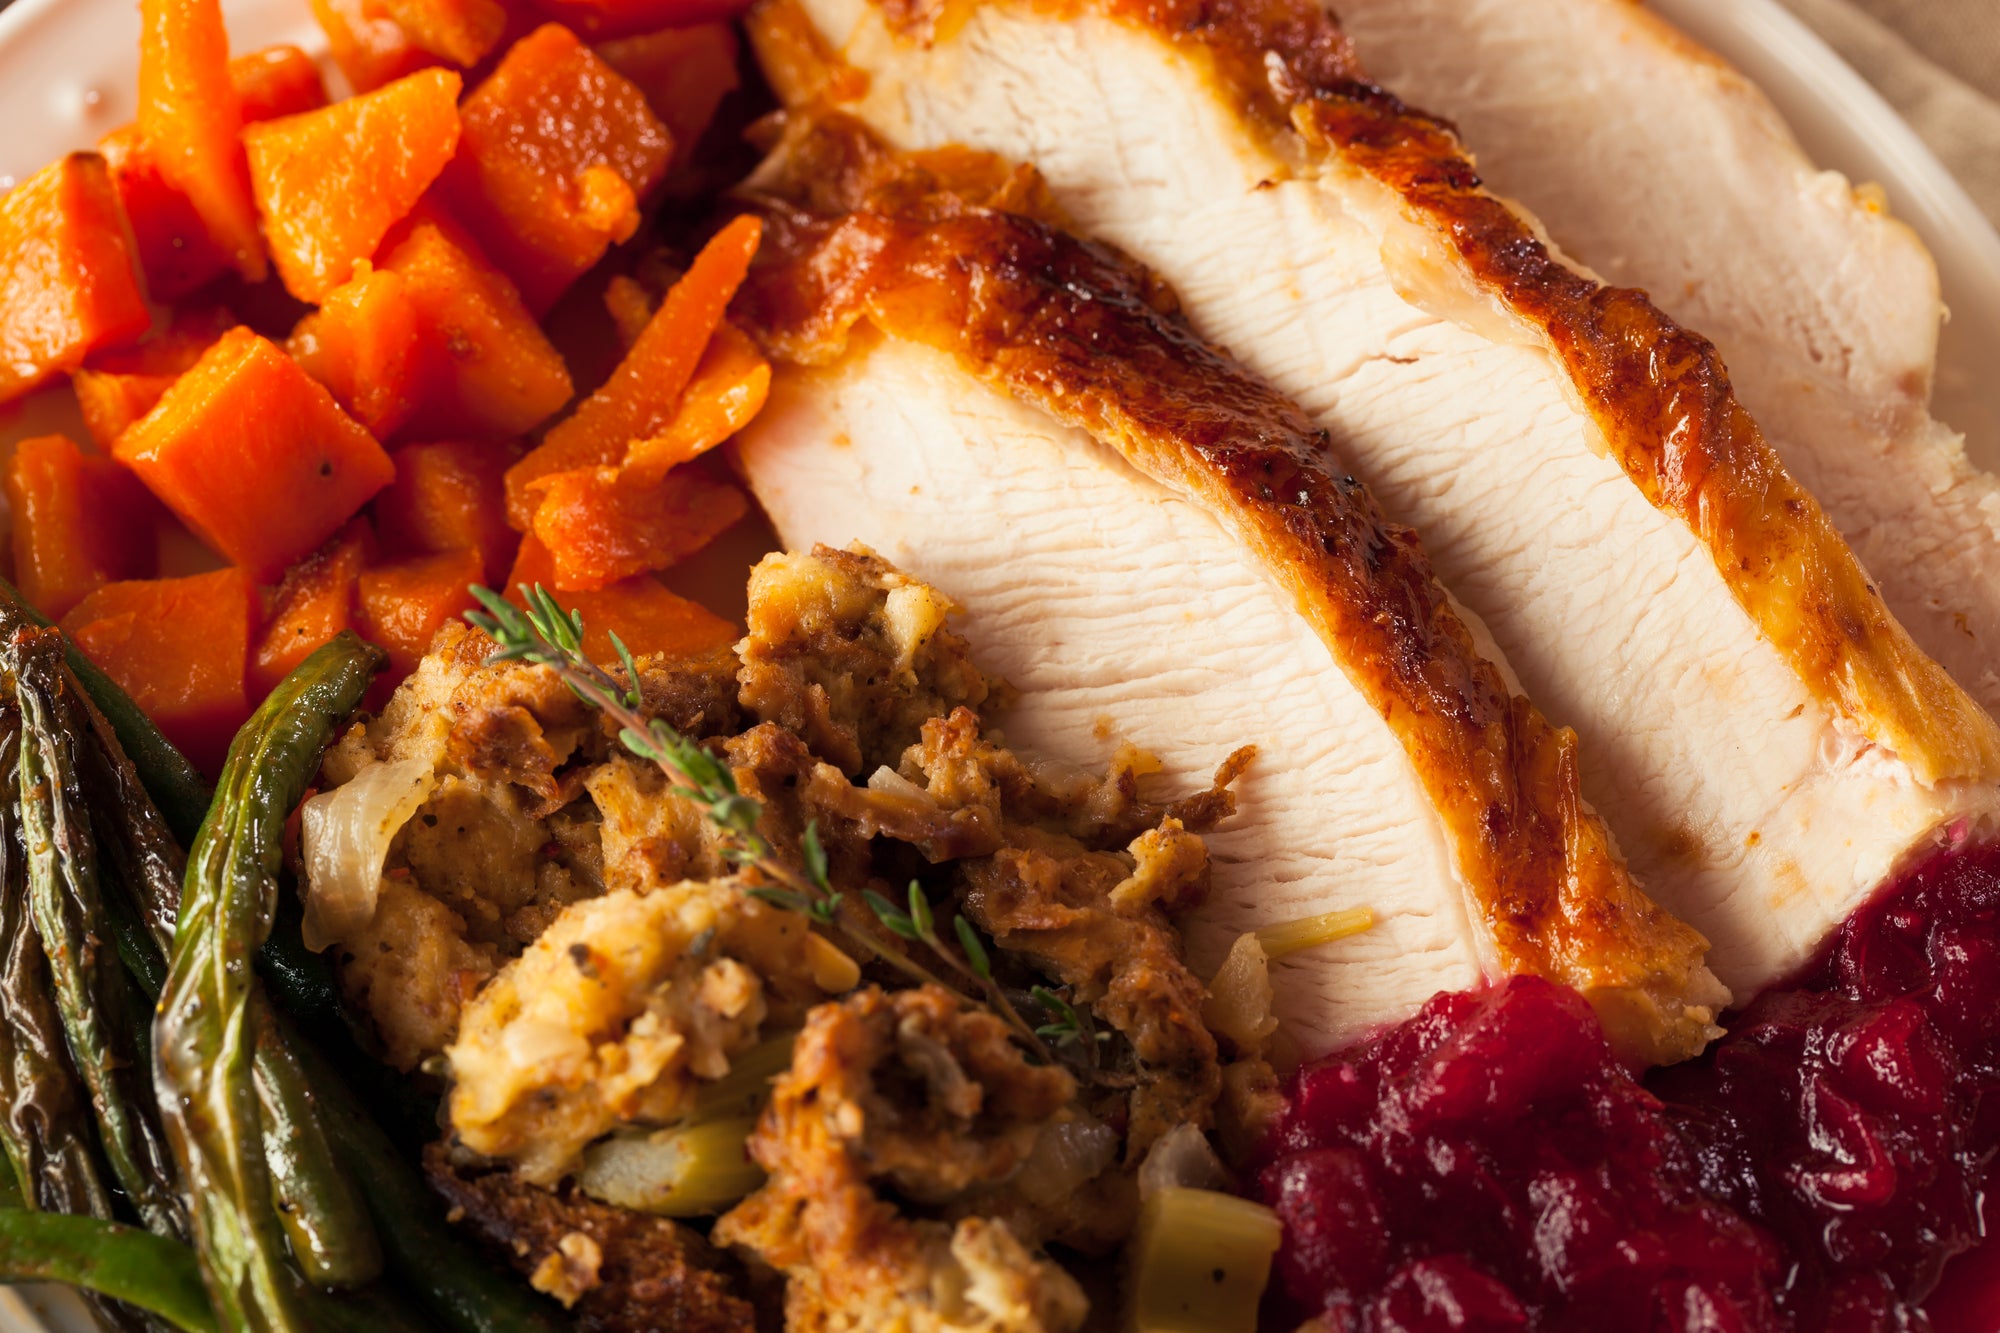 How to cook and eat a turkey without dying | Popular Science